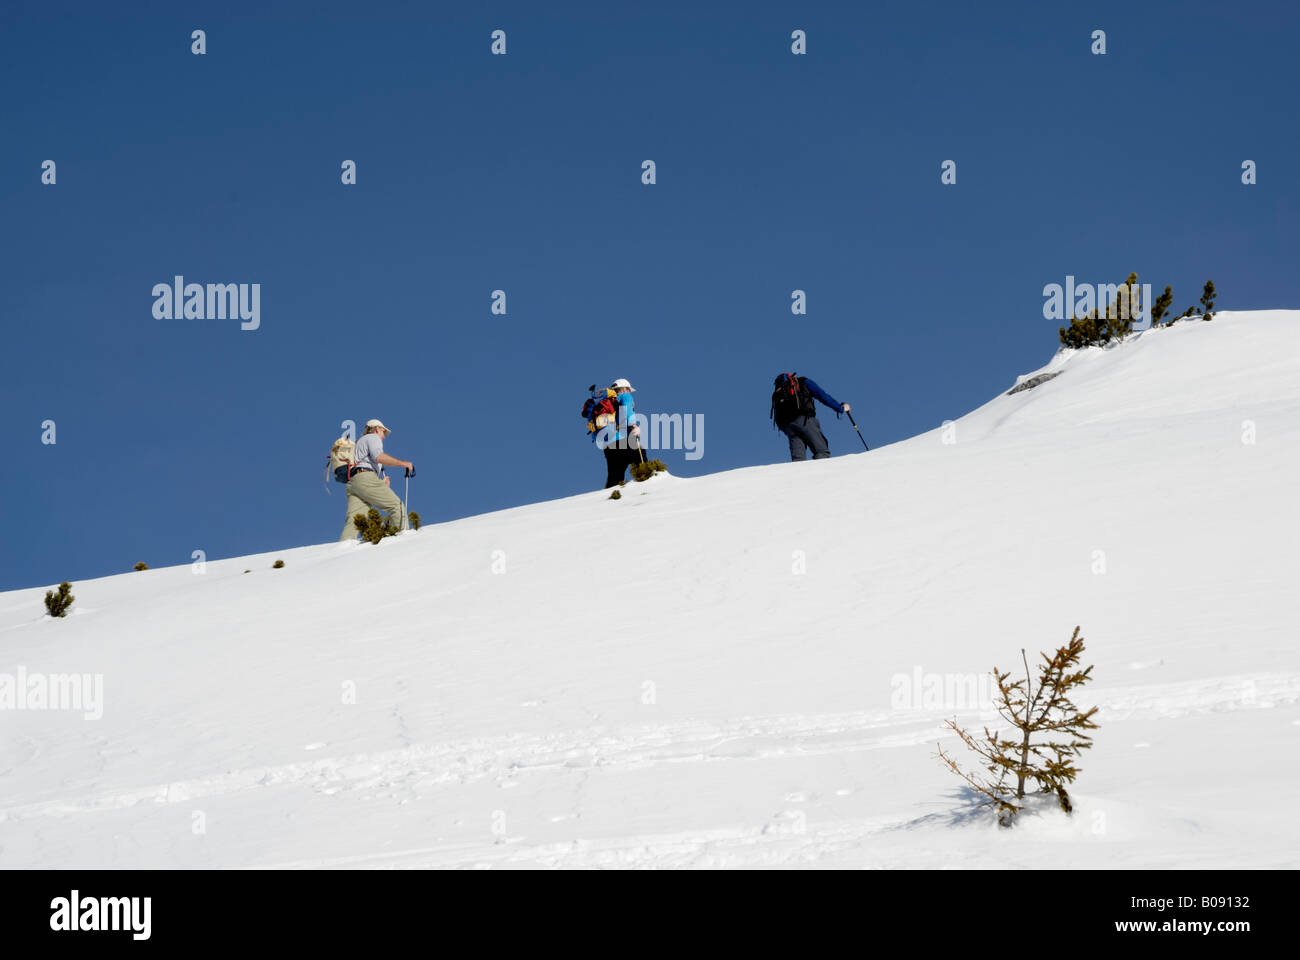 Mountaineers on skis climbing a snow-covered peak of the high alpine region in Rofan, Tyrol, Austria, Europe Stock Photo